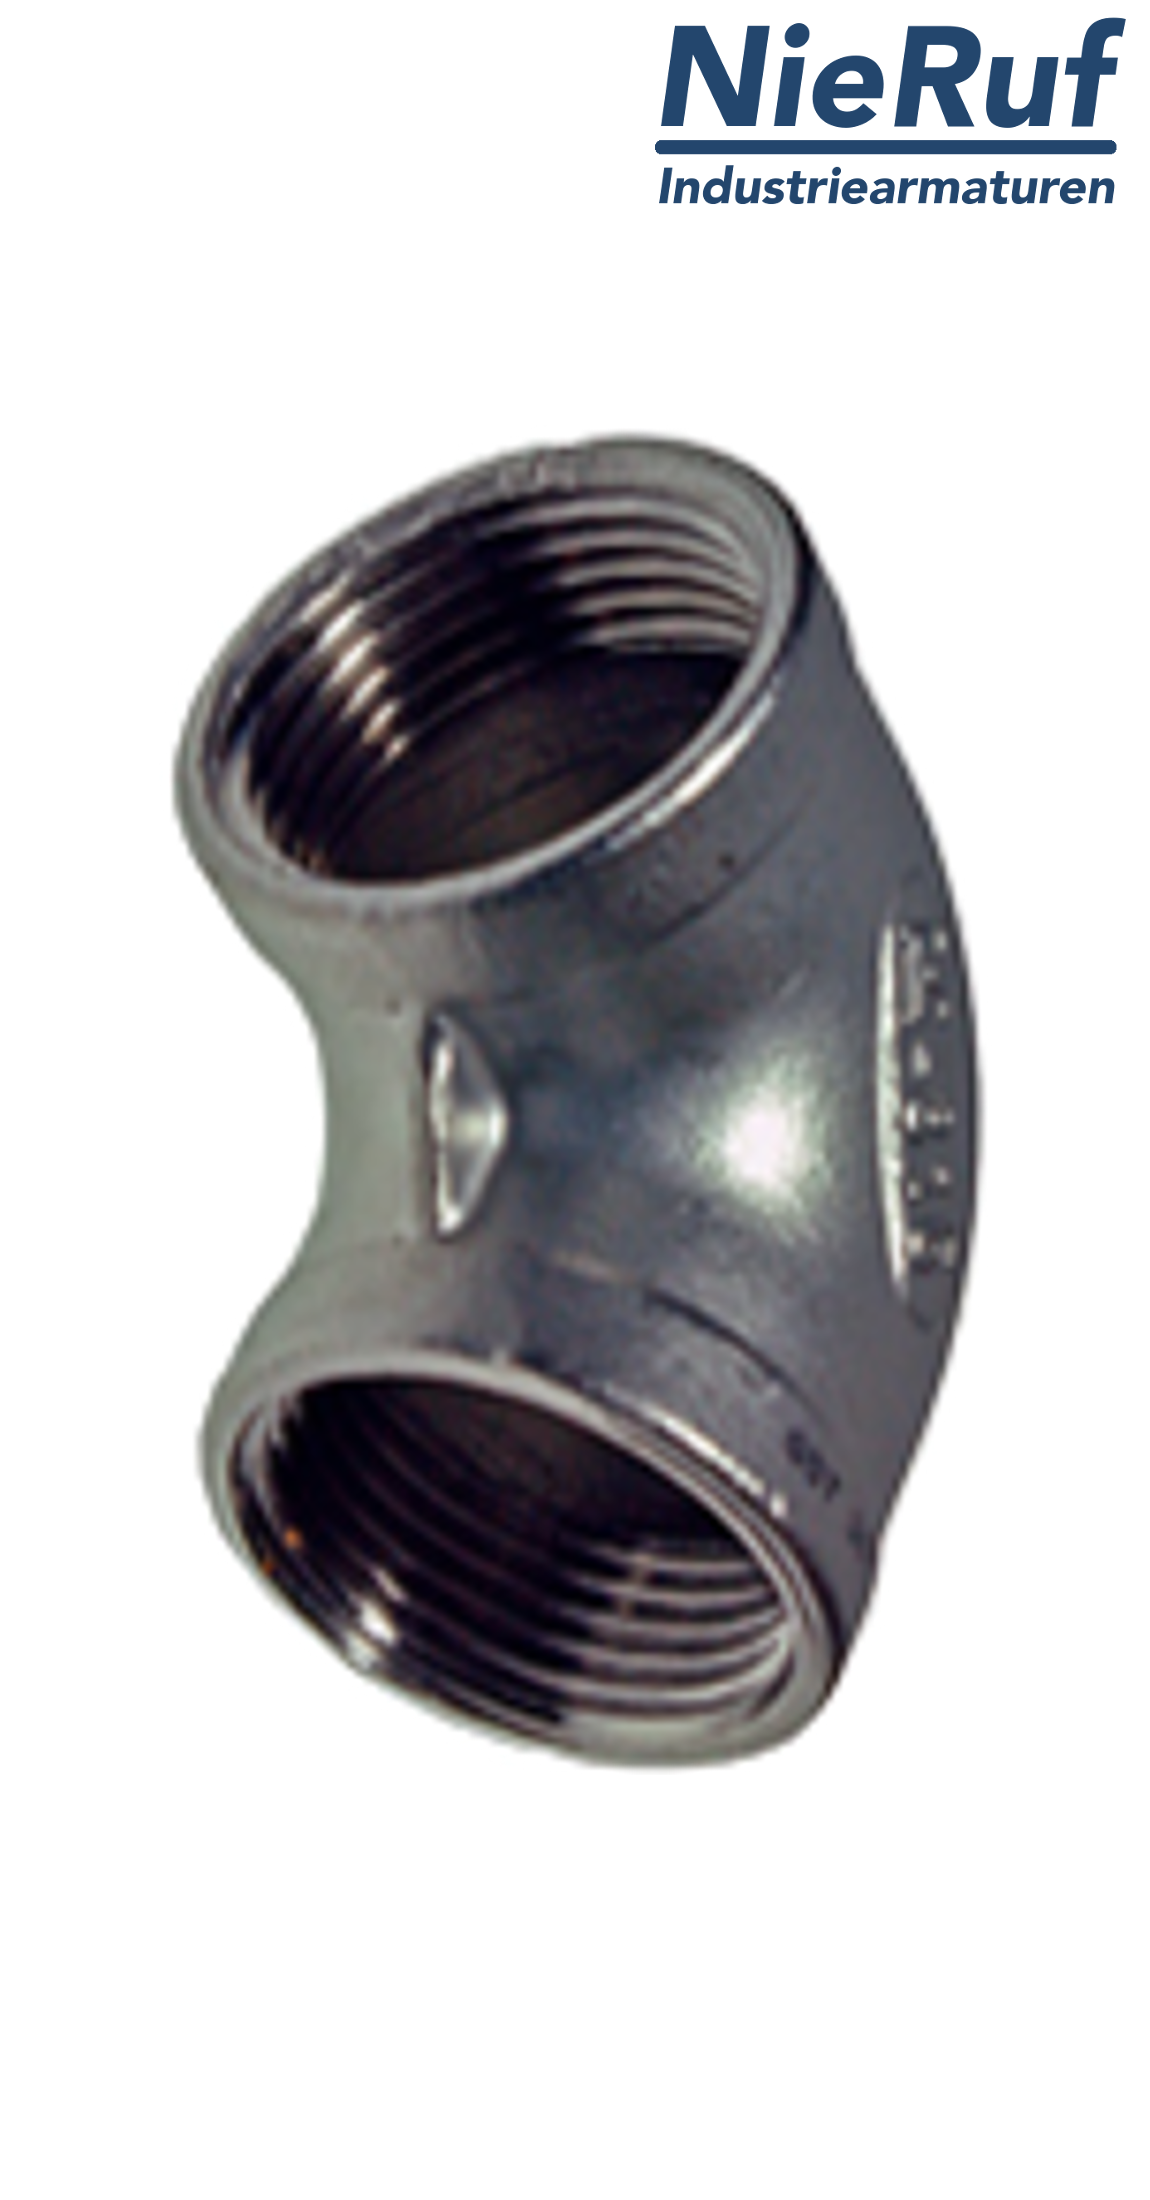 elbow 1 1/2" inch NPT stainless steel 316 90° angle